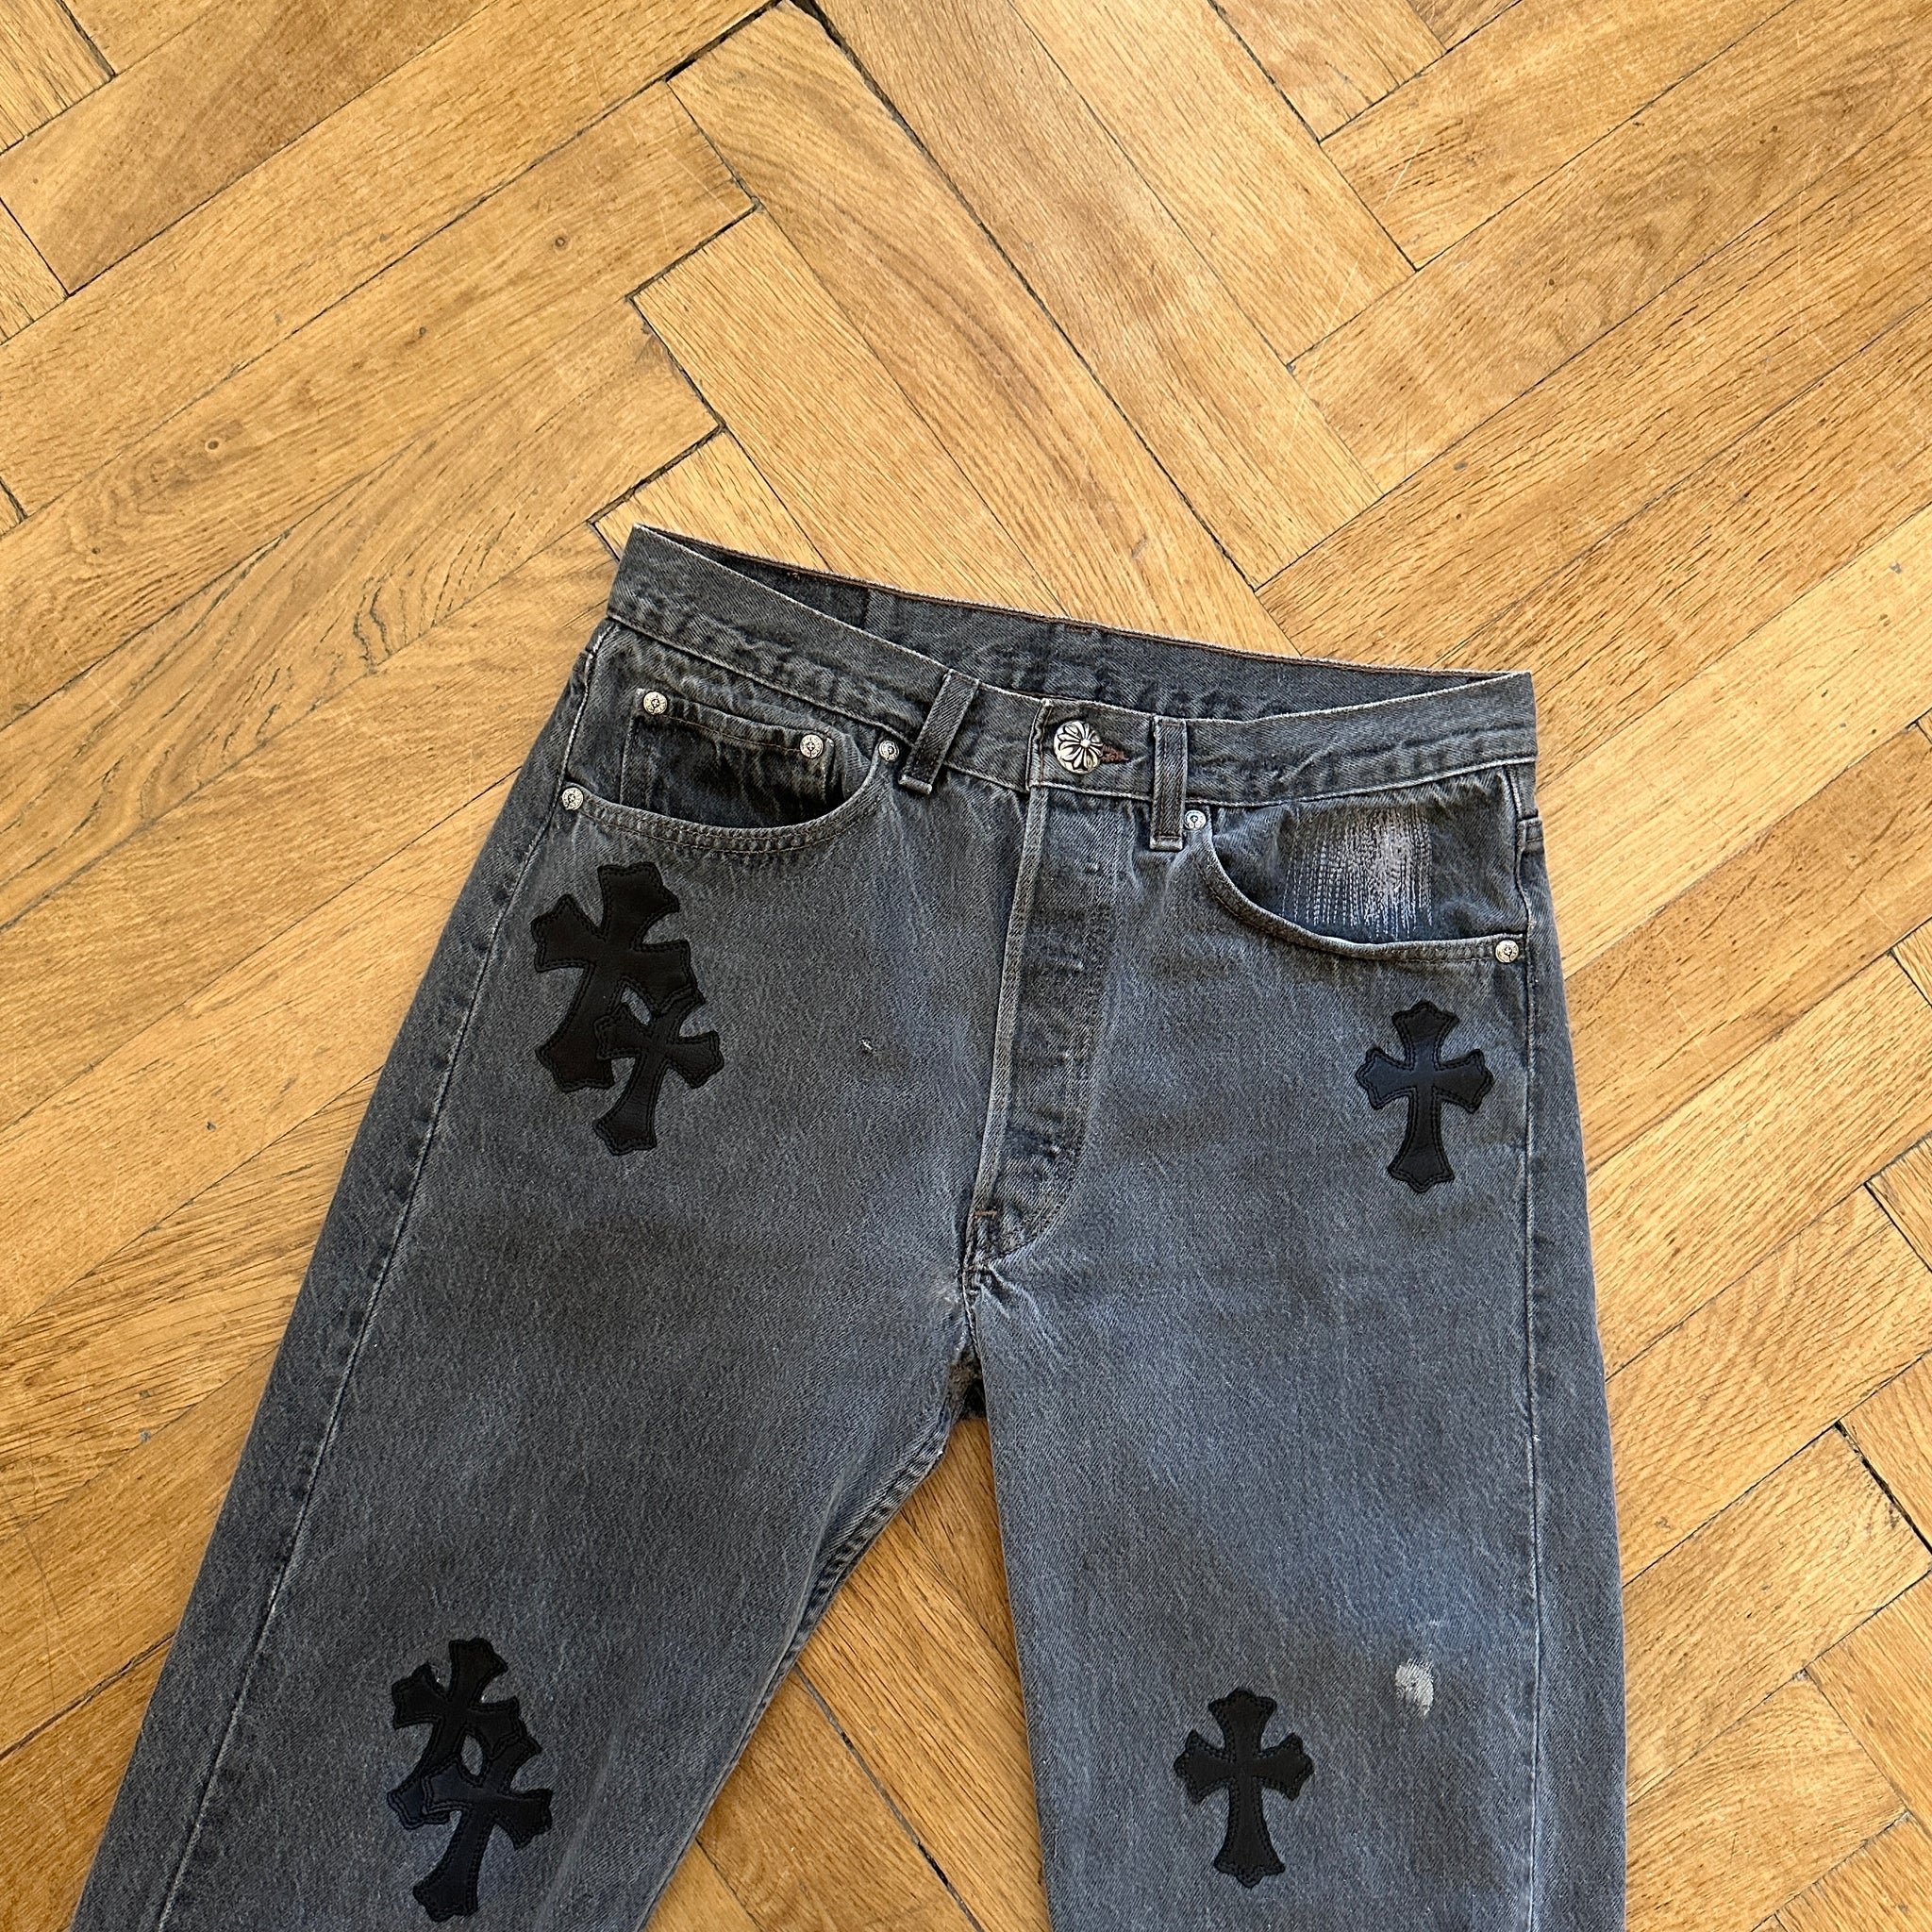 Black Chrome Hearts Cross Patches Jeans